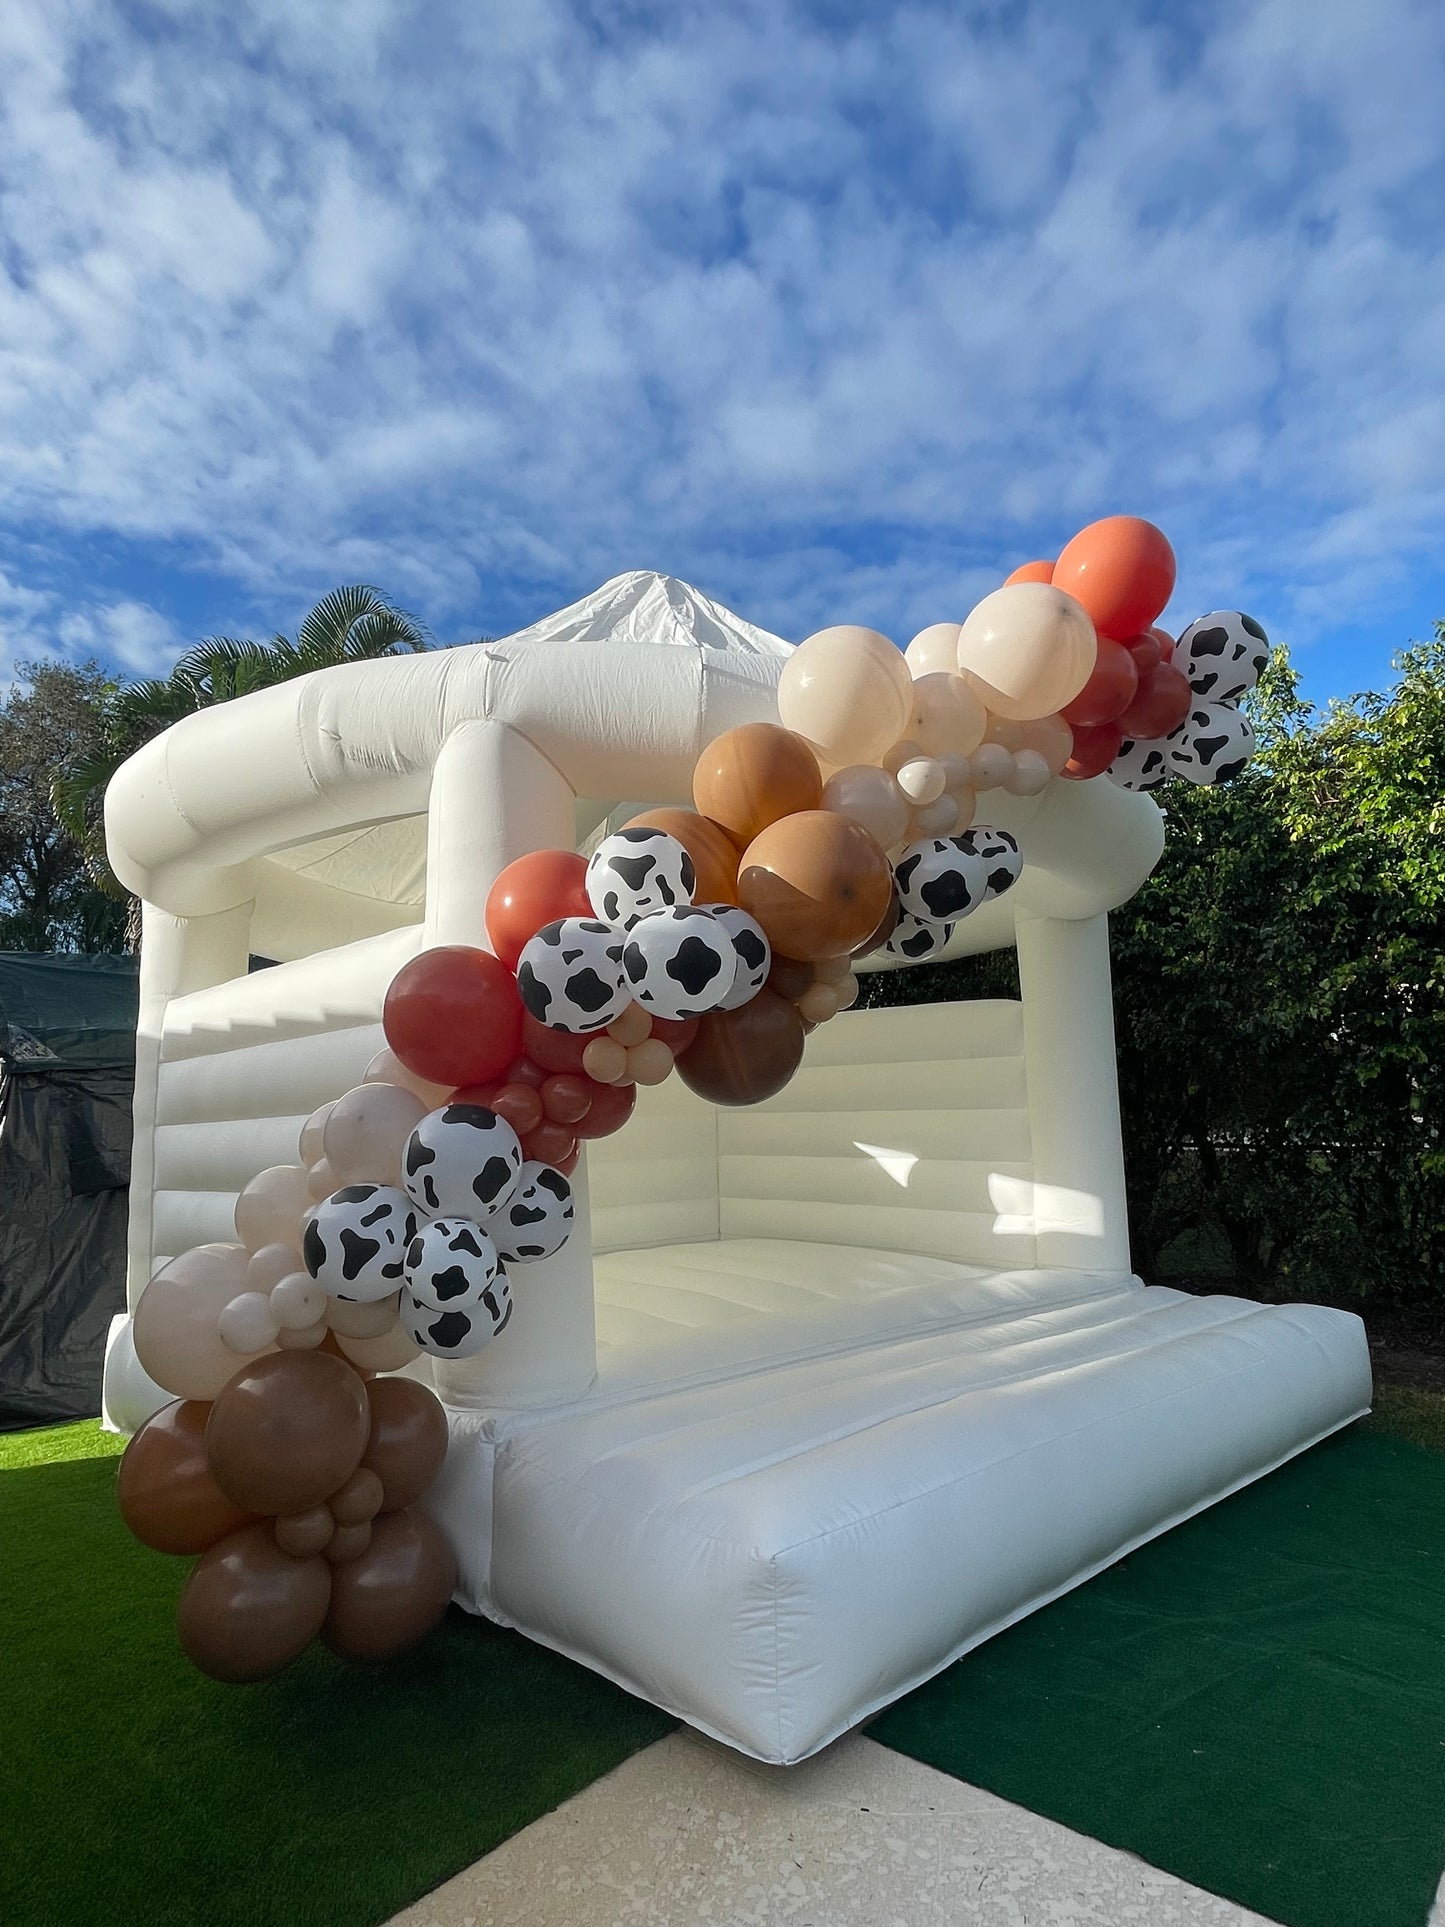 White Bounce House with Roof | 13x13ft | All ages